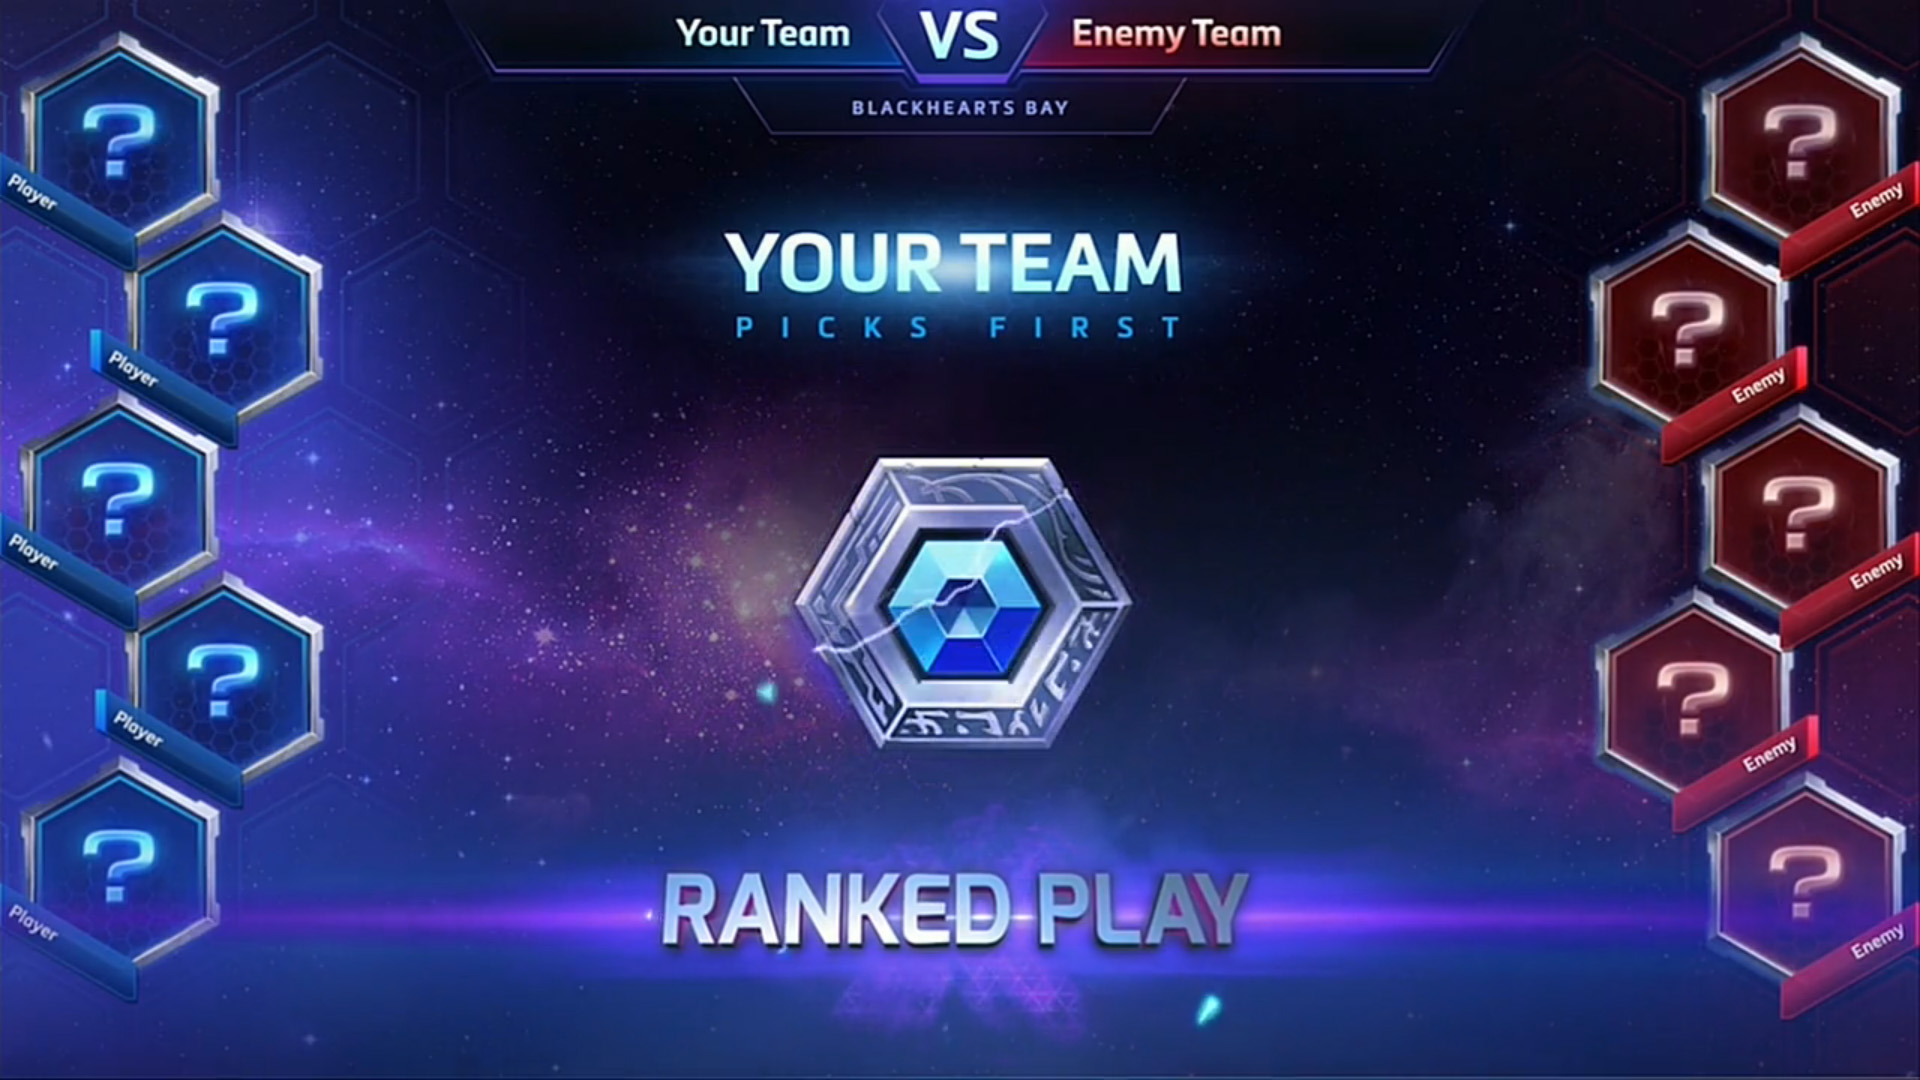 Playing ranked